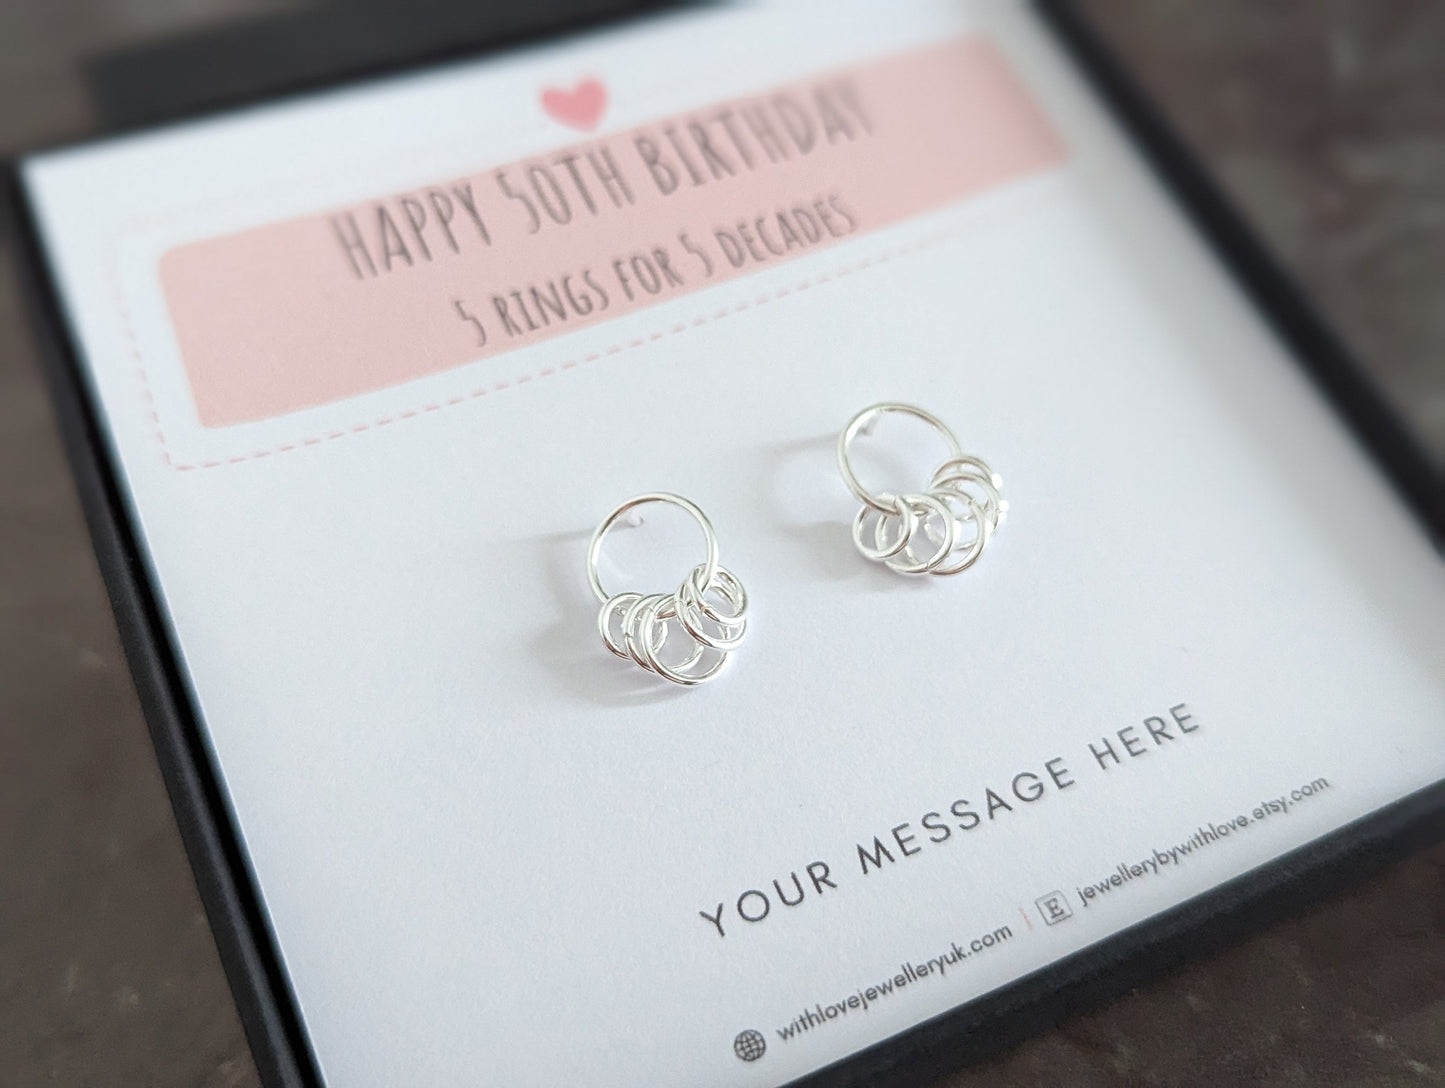 5 Rings 50th Birthday Sterling Silver Earrings | FREE Personalised Message Card